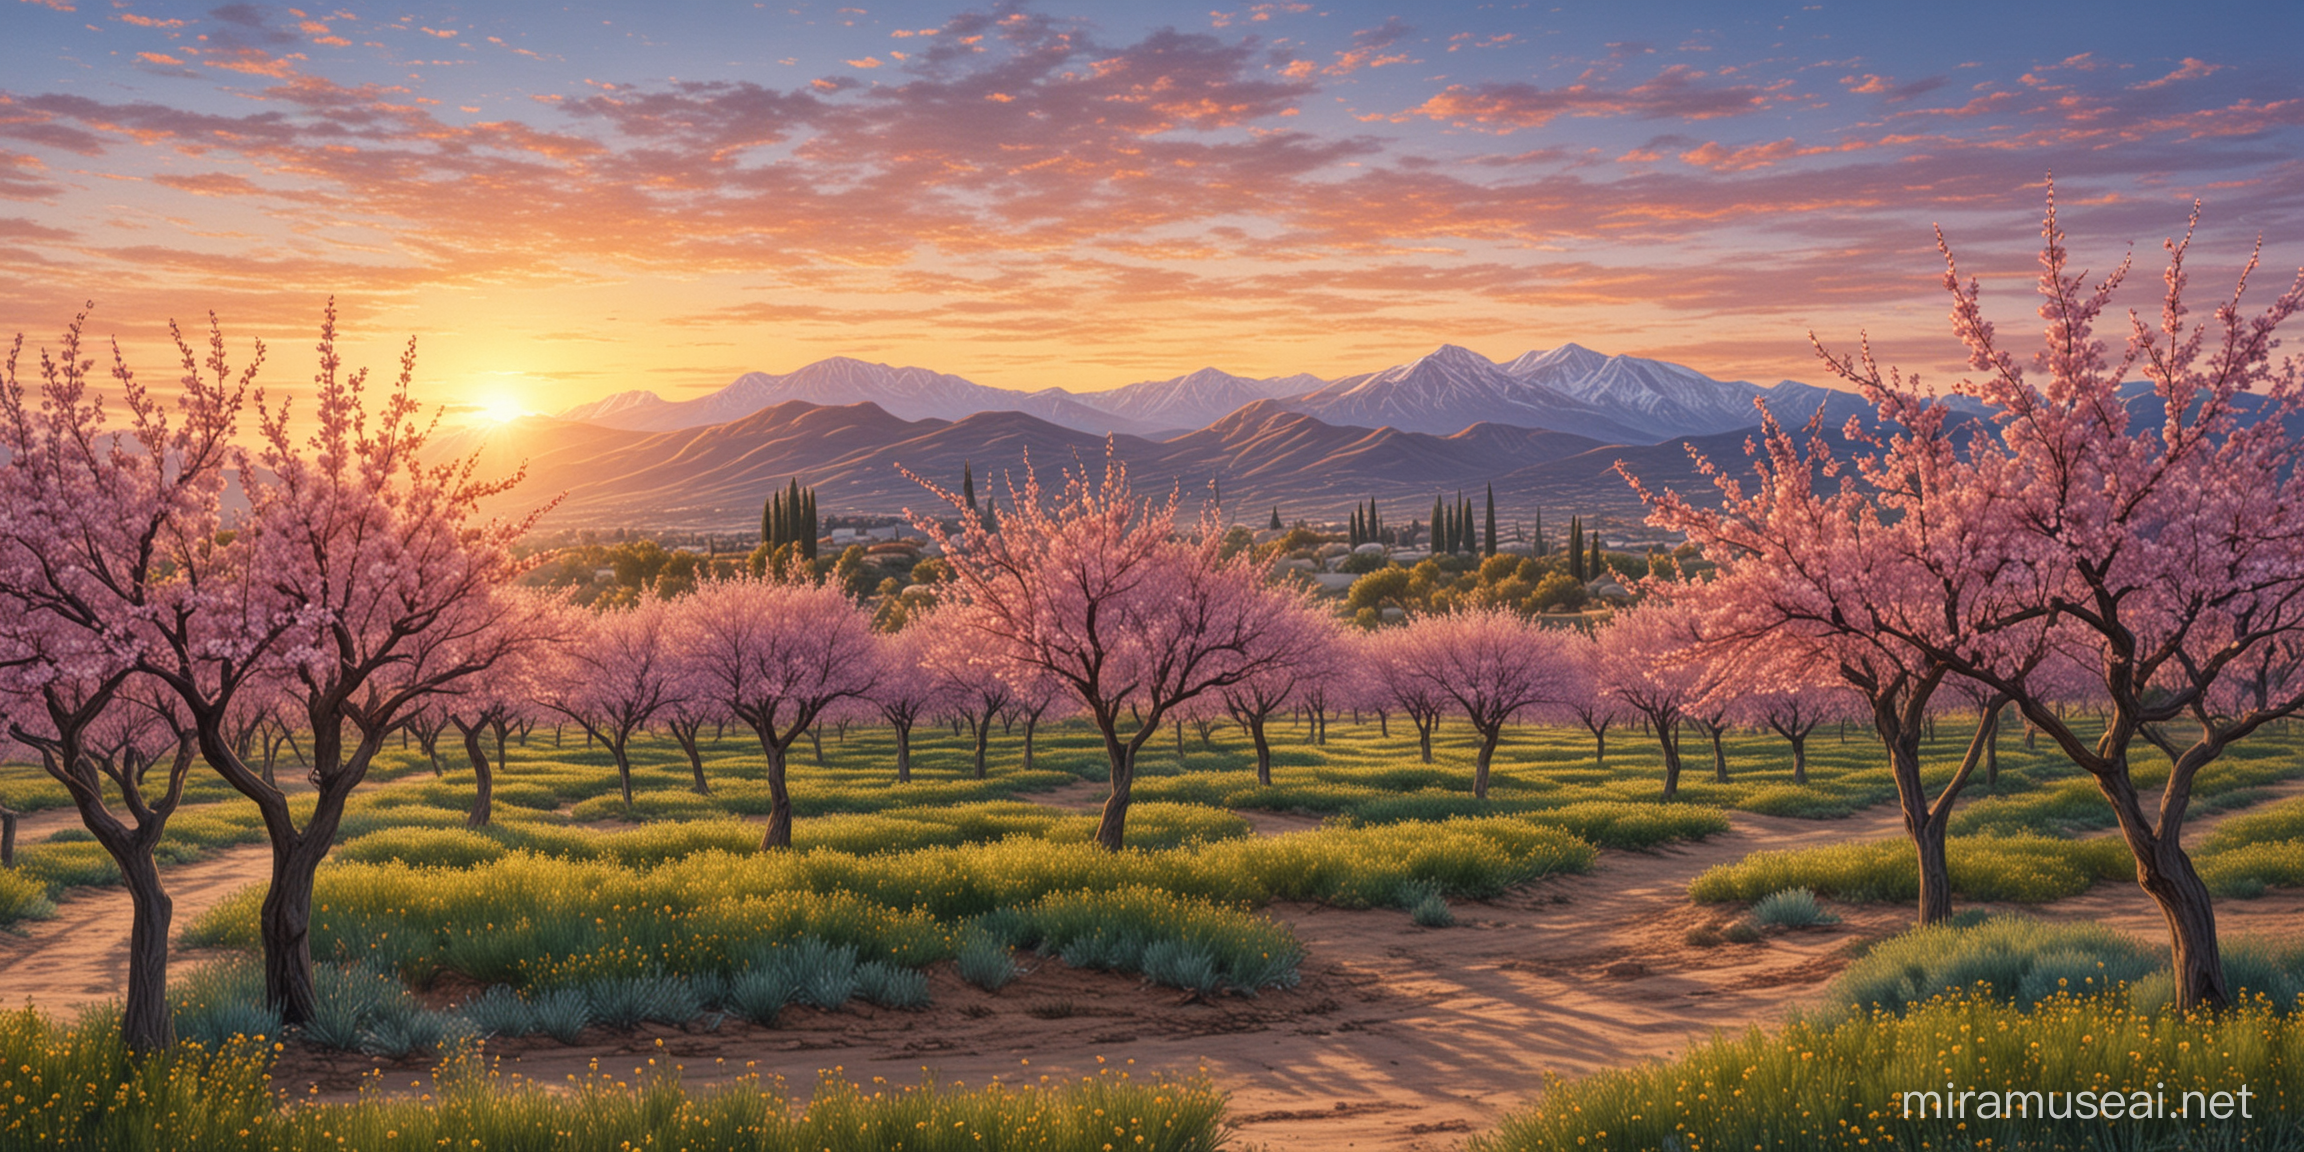 Draw a garden of almond trees, with mountains behind, in the evening when the sun is setting, draw it like a pencil drawing, colored